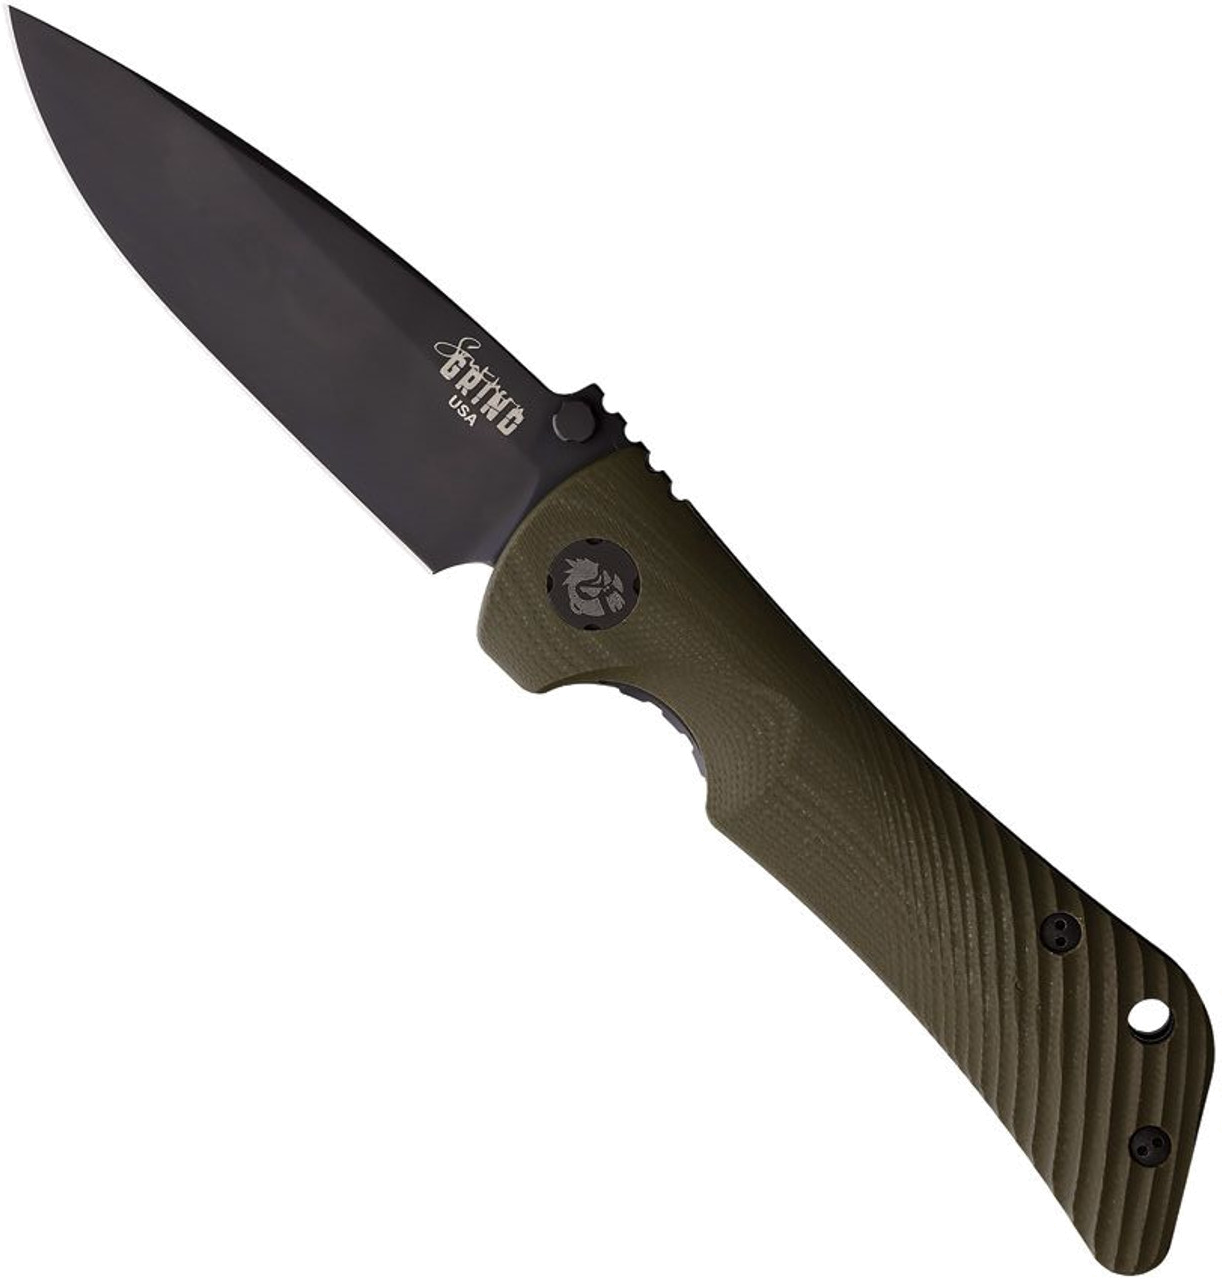 product image for Southern Grind Spider Monkey OD Green G-10 Magna Cut SG-22280